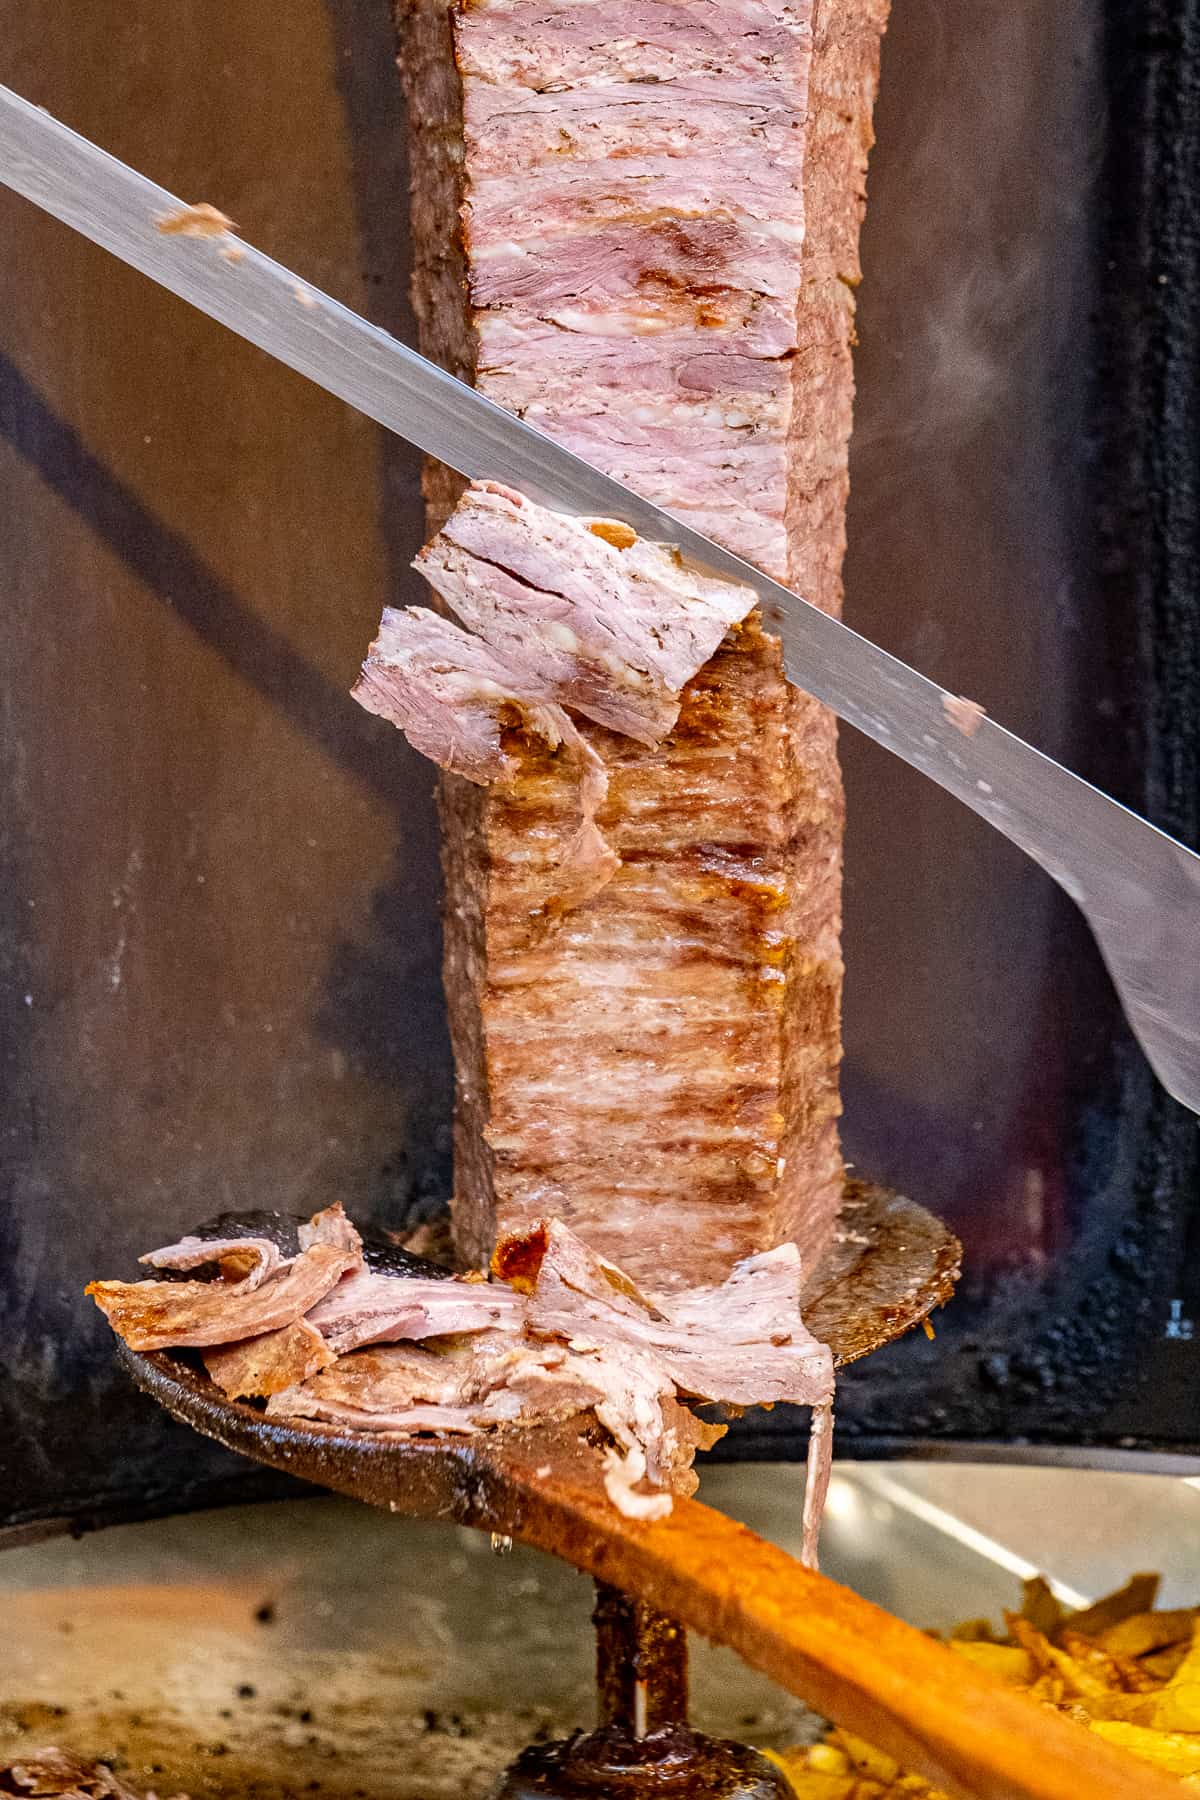 Doner kebab is being sliced with a huge knife and thin slices falling into a wooden spoon.